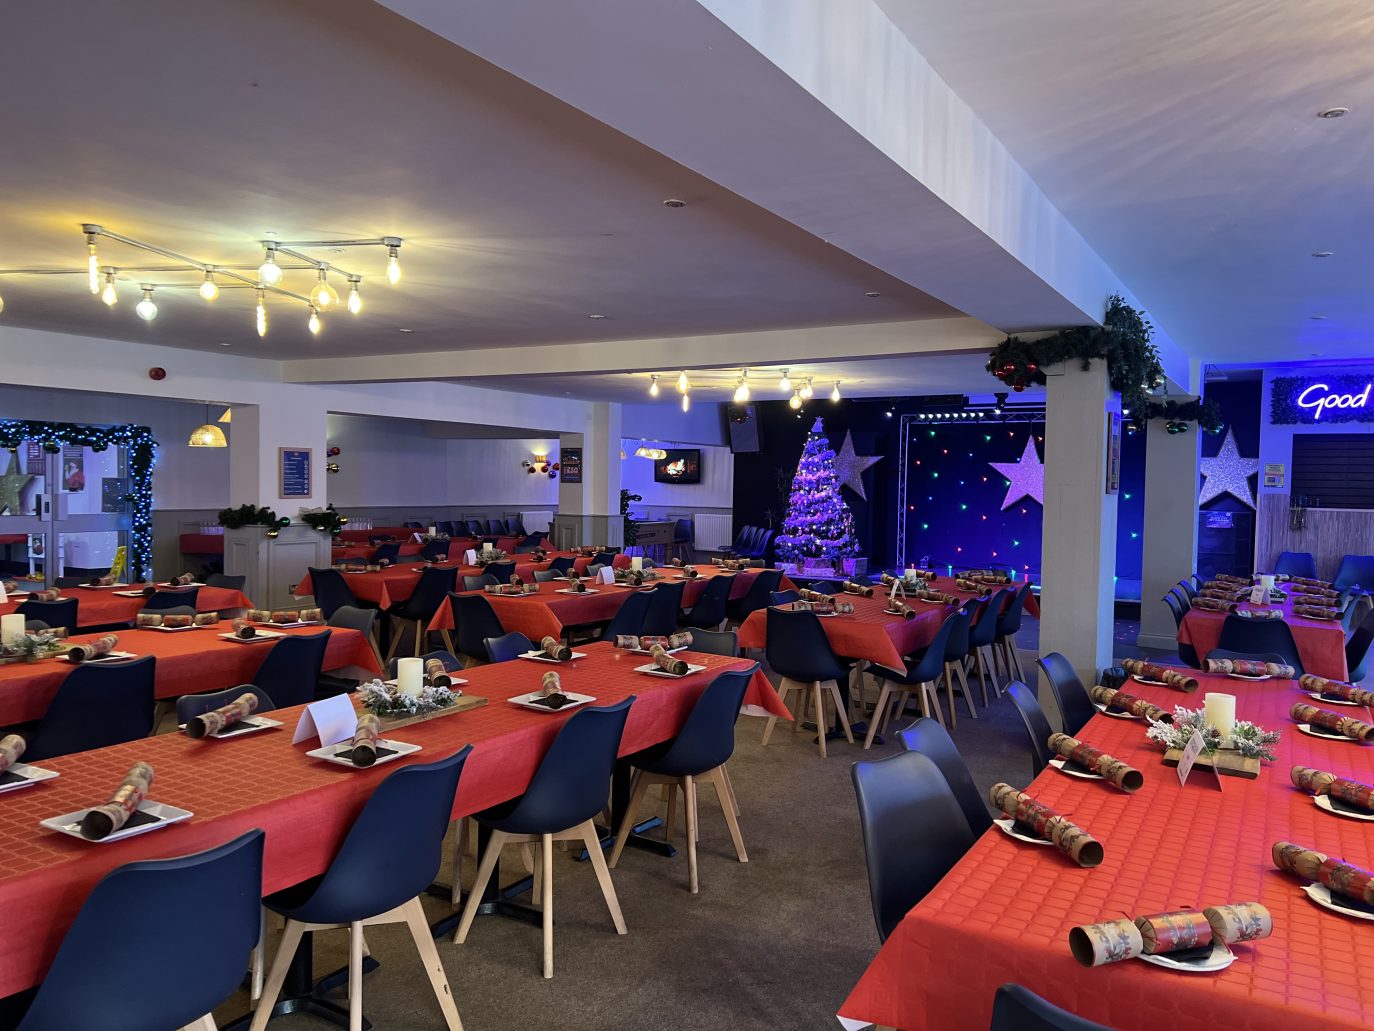 A festive banquet hall decorated for Christmas with red tablecloths, set tables, and a lit Christmas tree next to a stage with a 